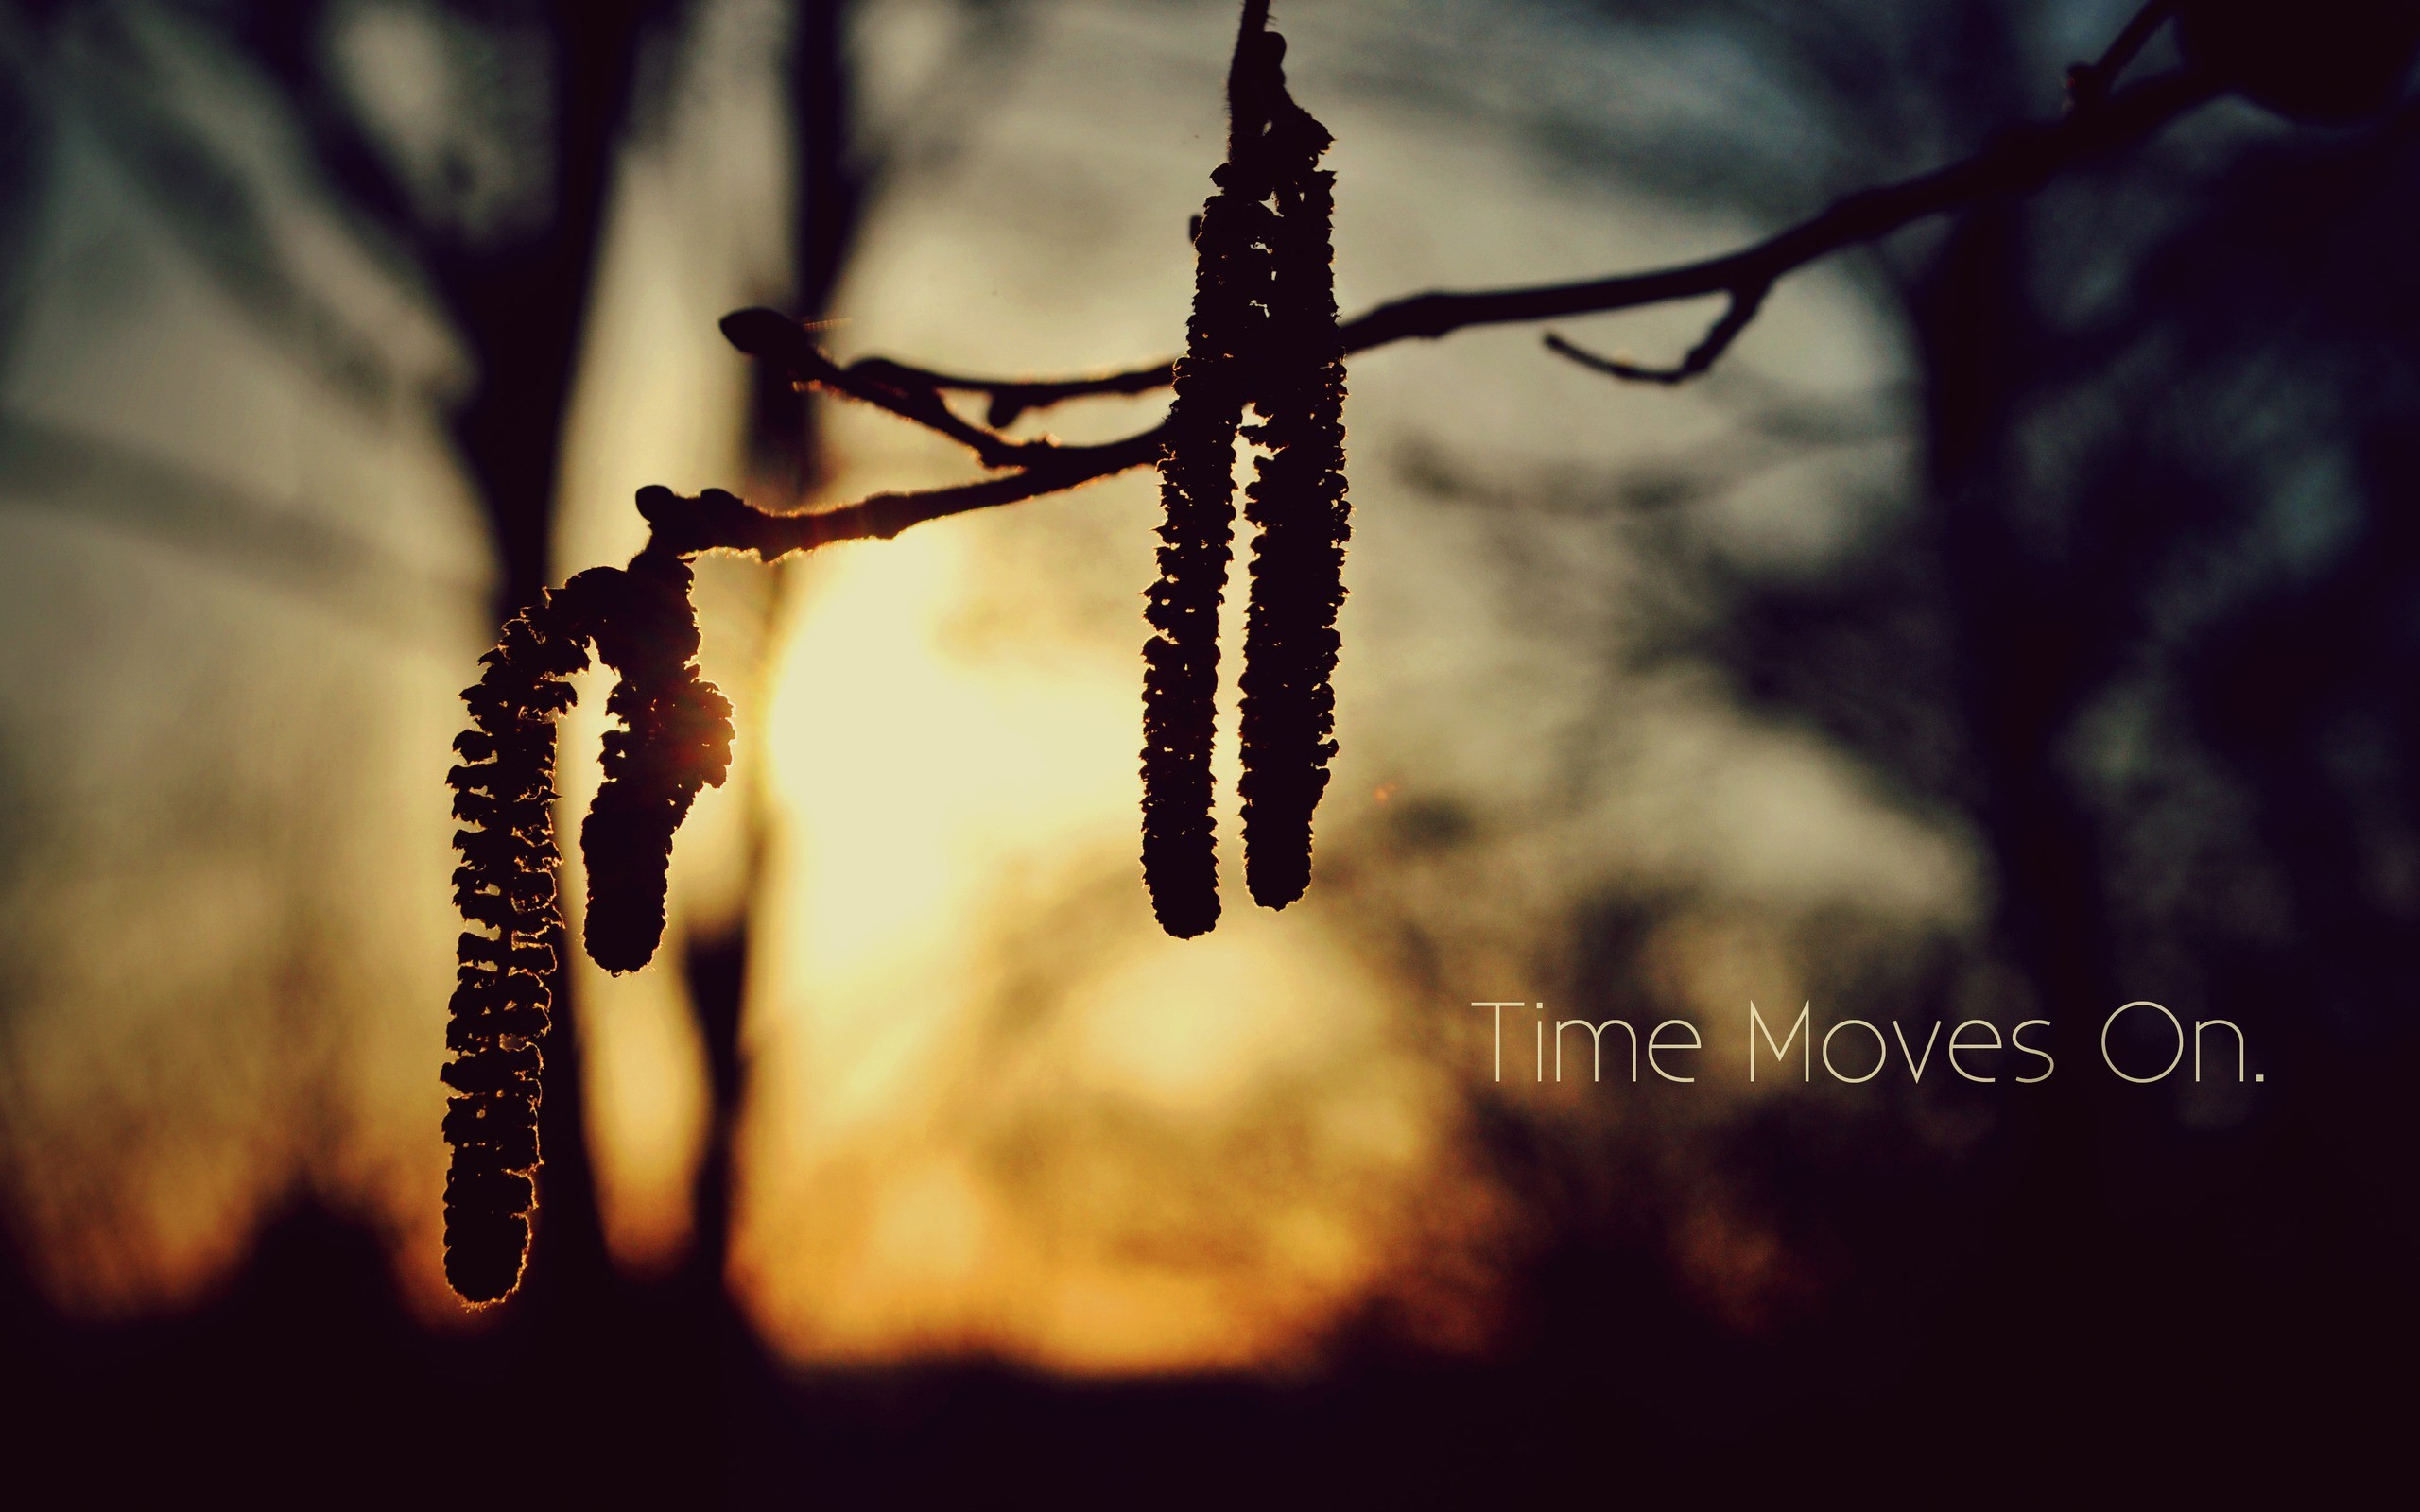 General 2560x1600 nature sunlight twigs blurred silhouette quote time typography